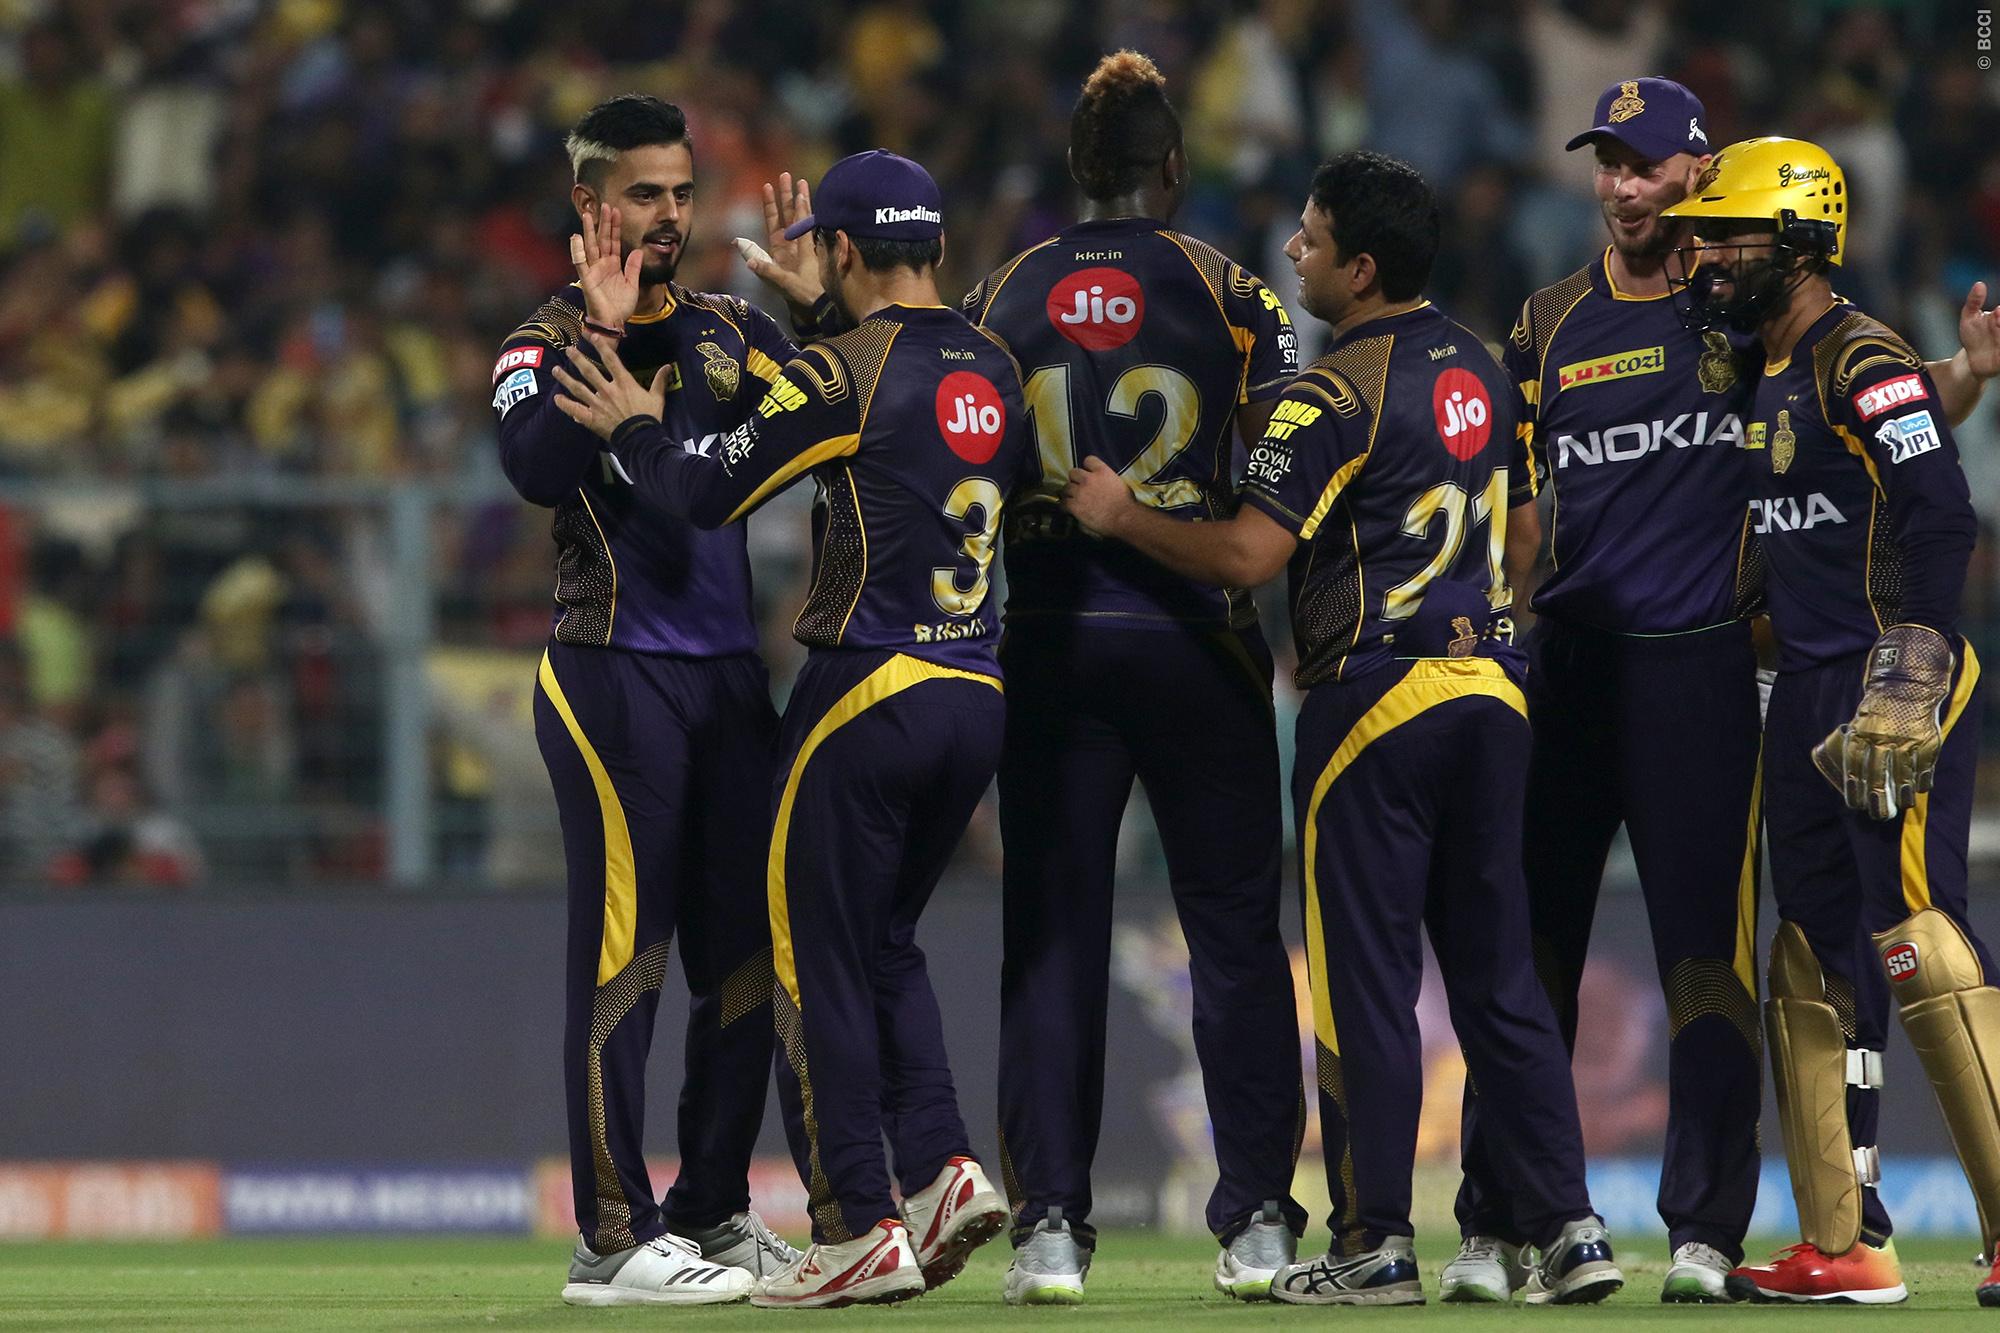 IPL 2020 Auction | KKR treading on thin ice by not buying able back-up players, feels Gautam Gambhir